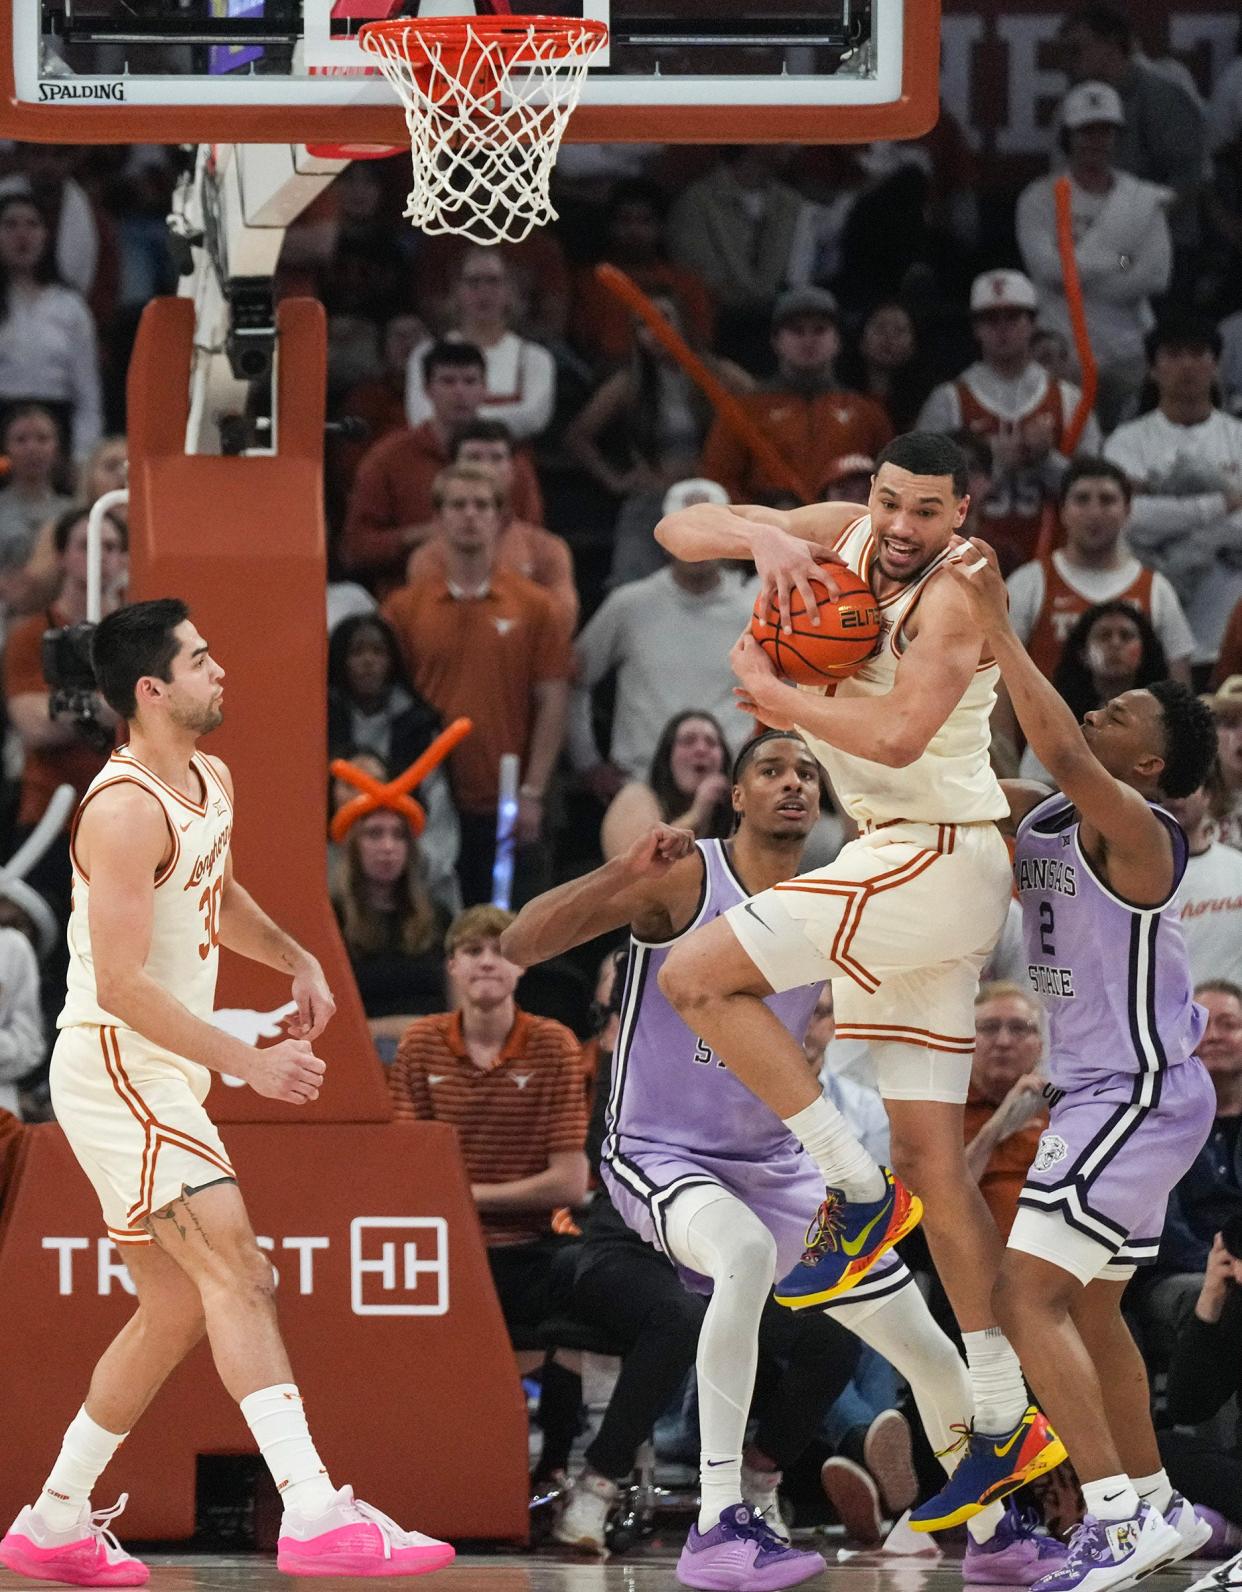 Texas forward Dylan Disu fights for a rebound in Monday's win over Kansas State. The Longhorns will keep fighting for a better NCAA Tournament seed with Saturday's trip to Kansas. Prognosticators are currently predicting a No. 8 or No. 9 seed for the Longhorns.